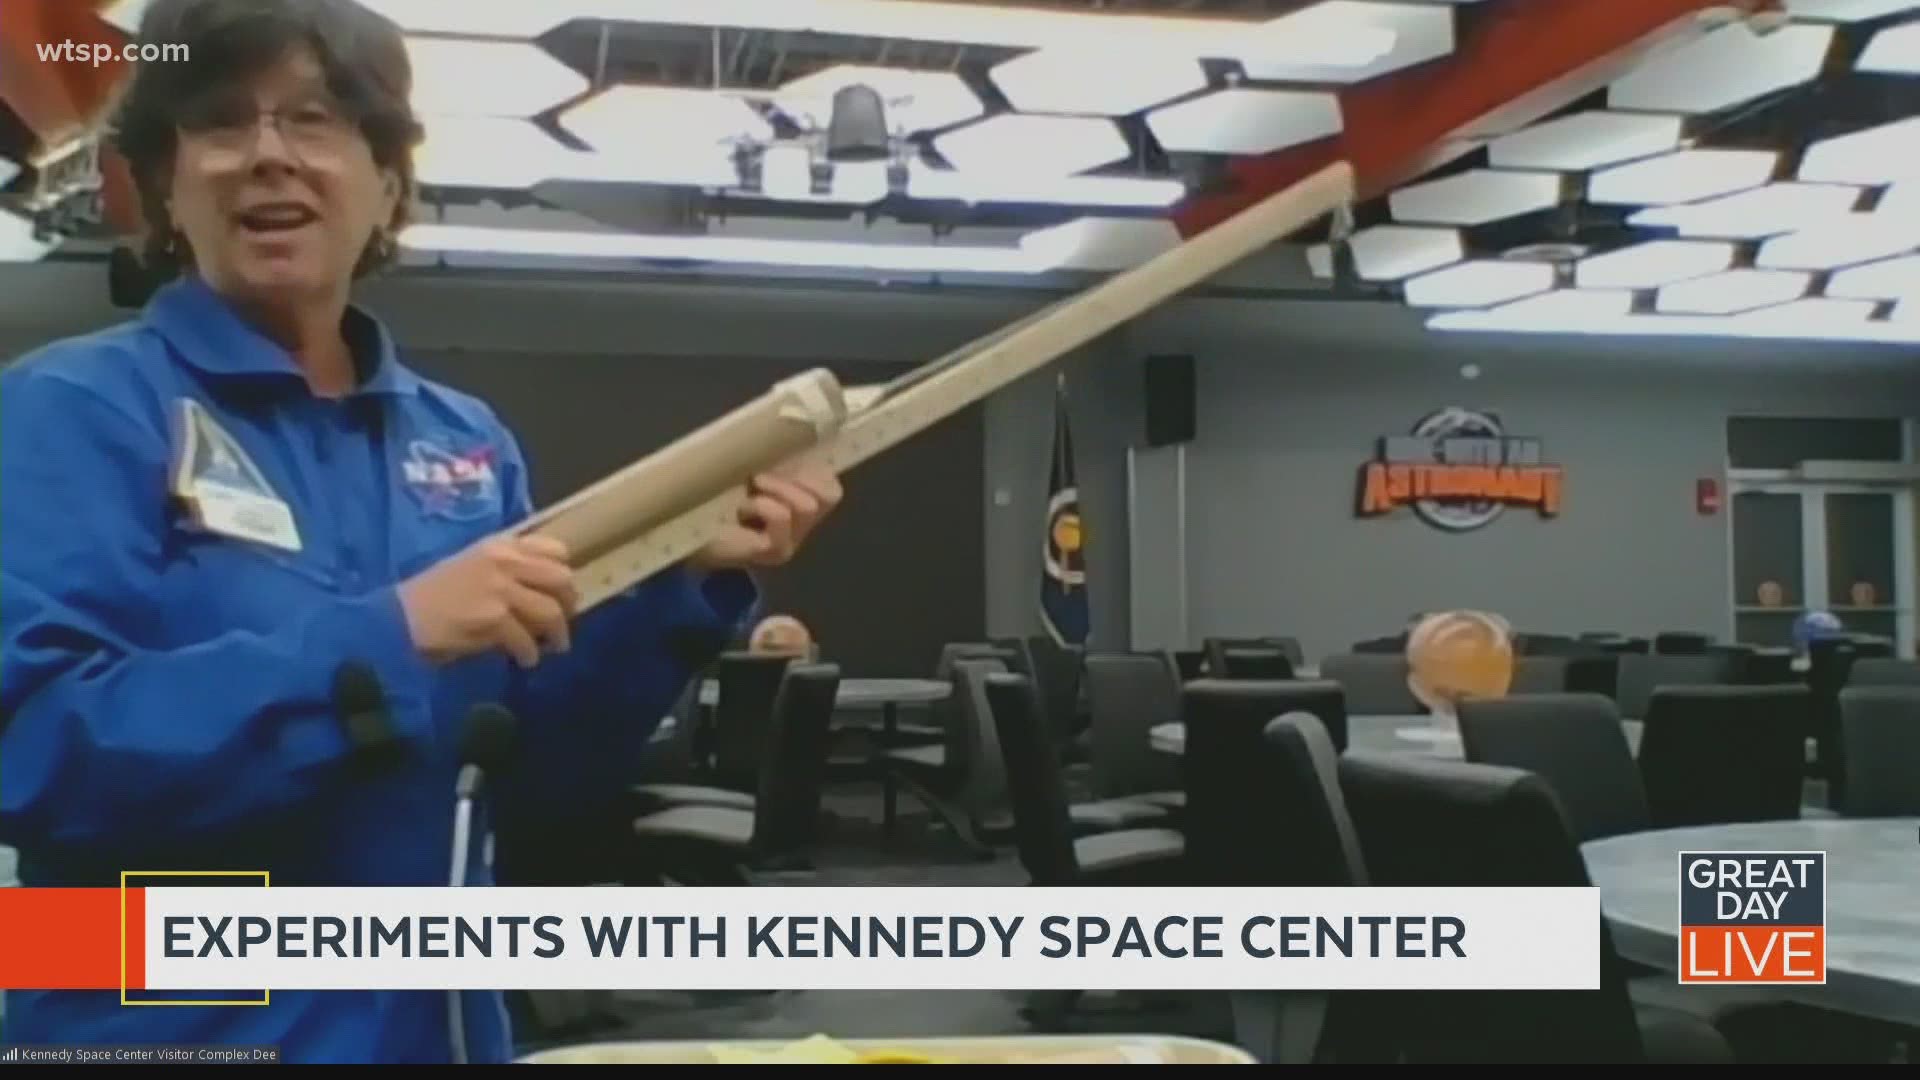 Science experiments with Kennedy Space Center